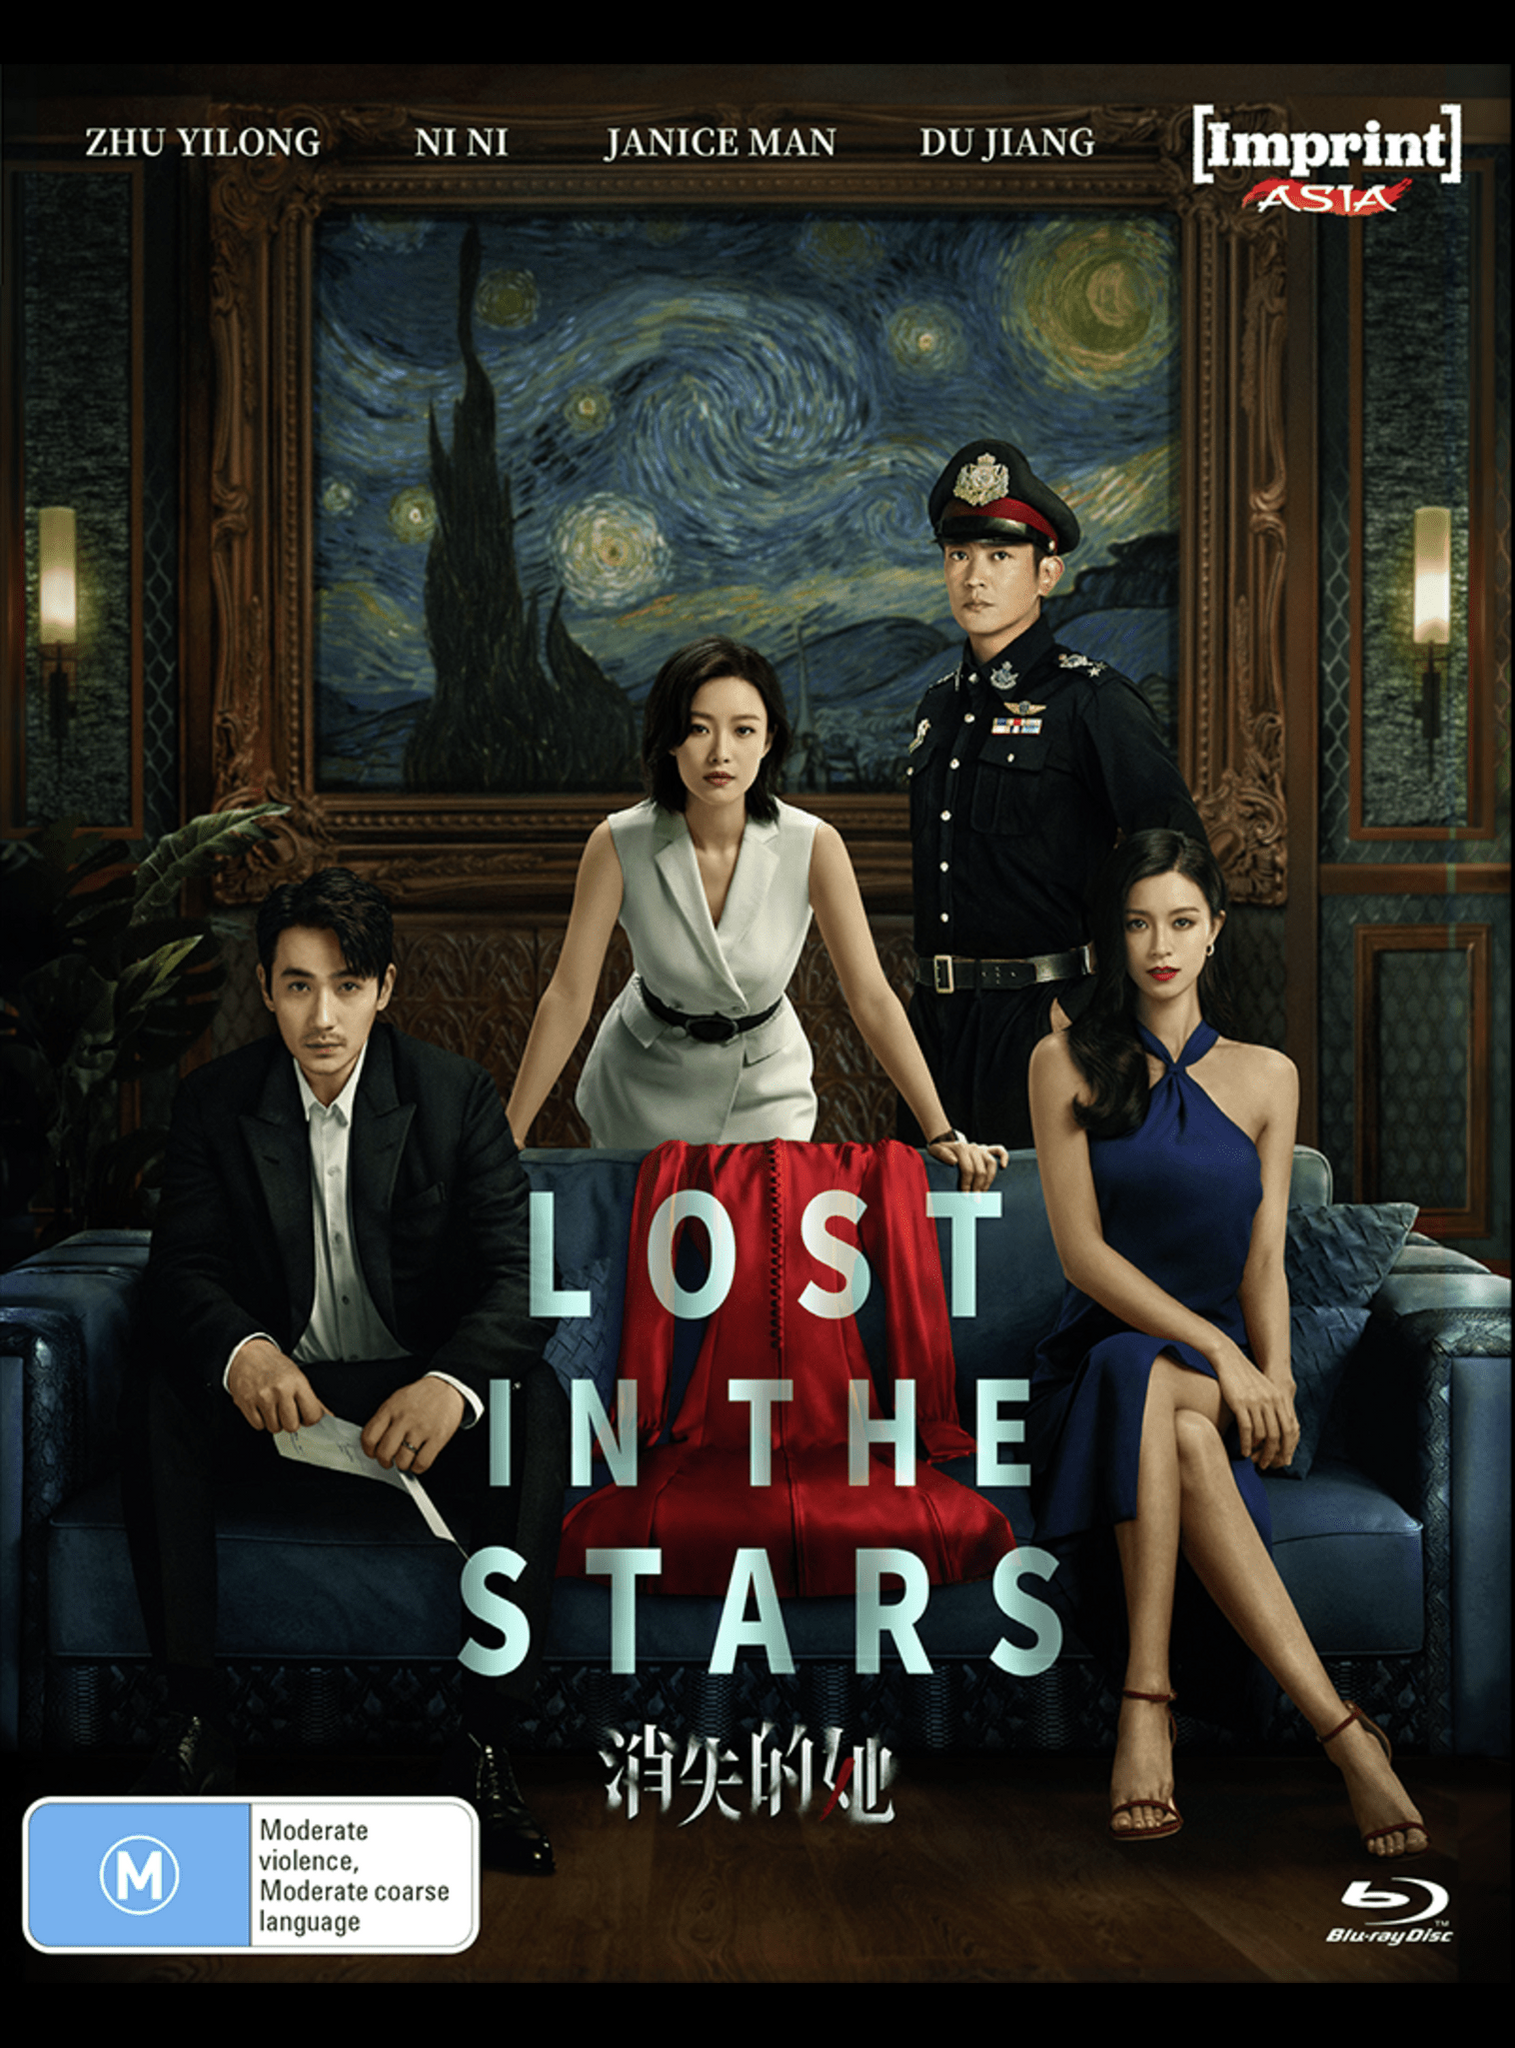 LOST IN THE STARS (IMPRINT ASIA COLLECTION #1) - BLU-RAY